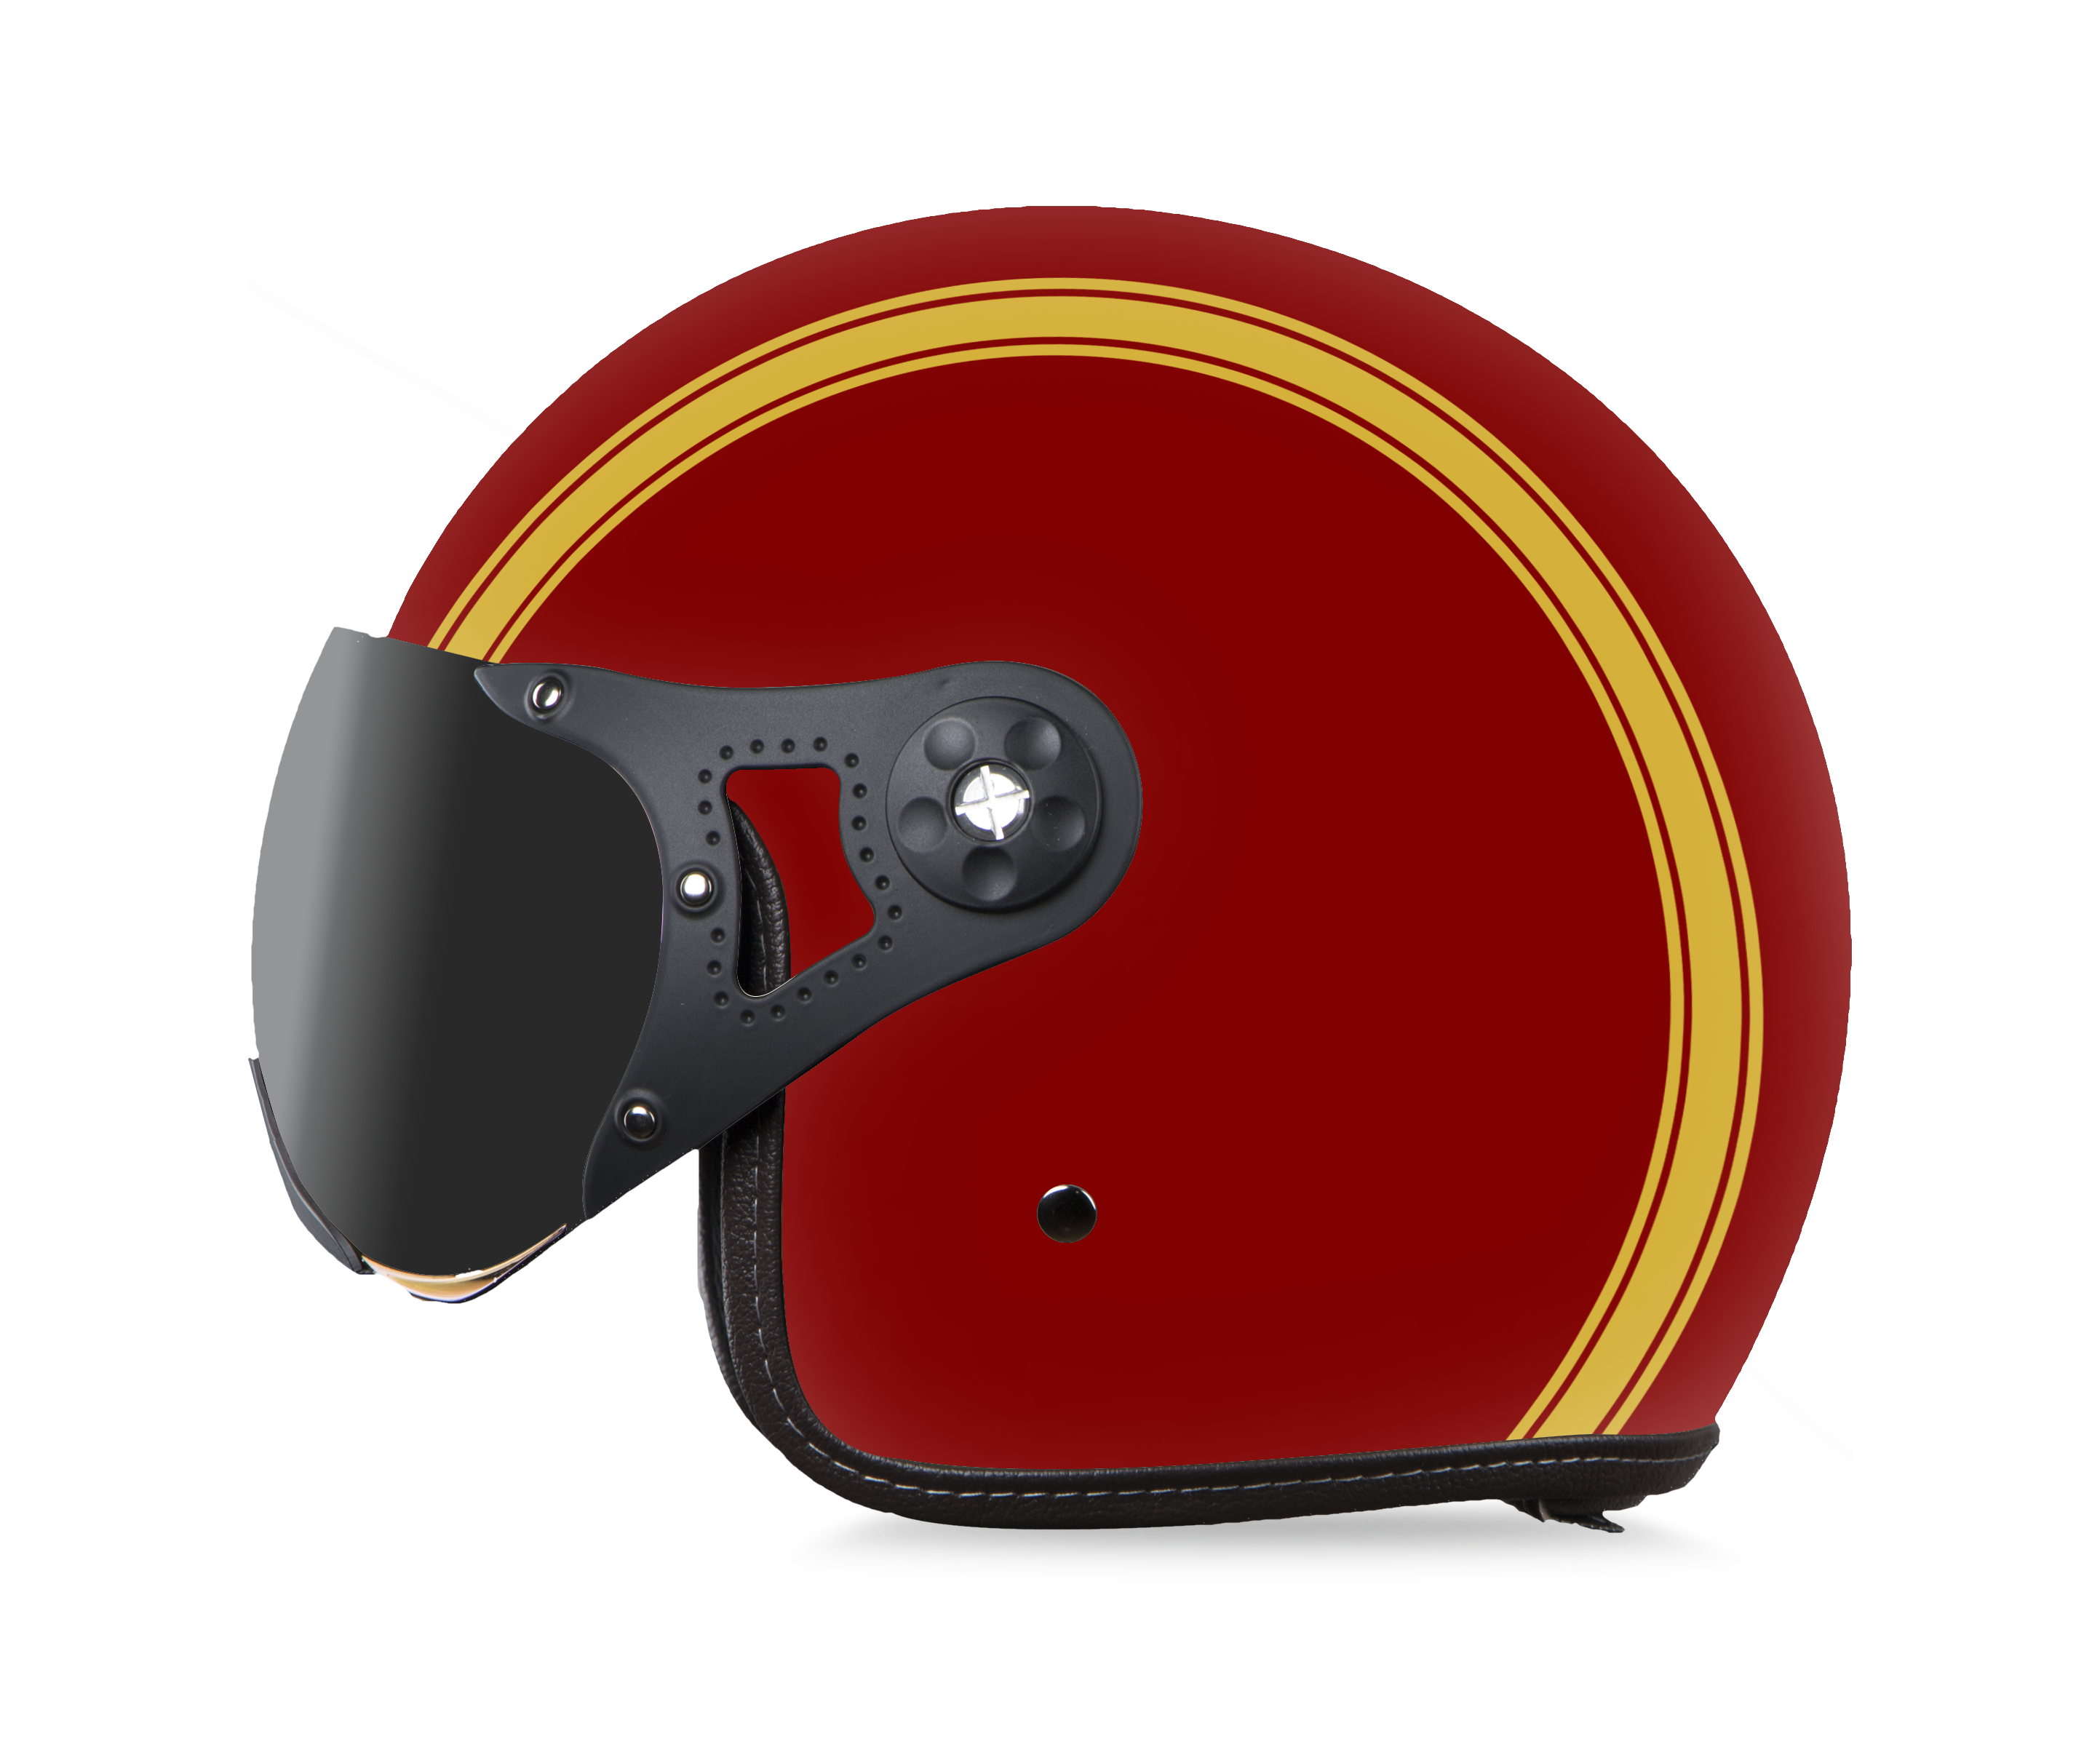 SB-40 DOT STRIPE MAT MAROON WITH GOLD (WITH EXTRA CLEAR VISOR)